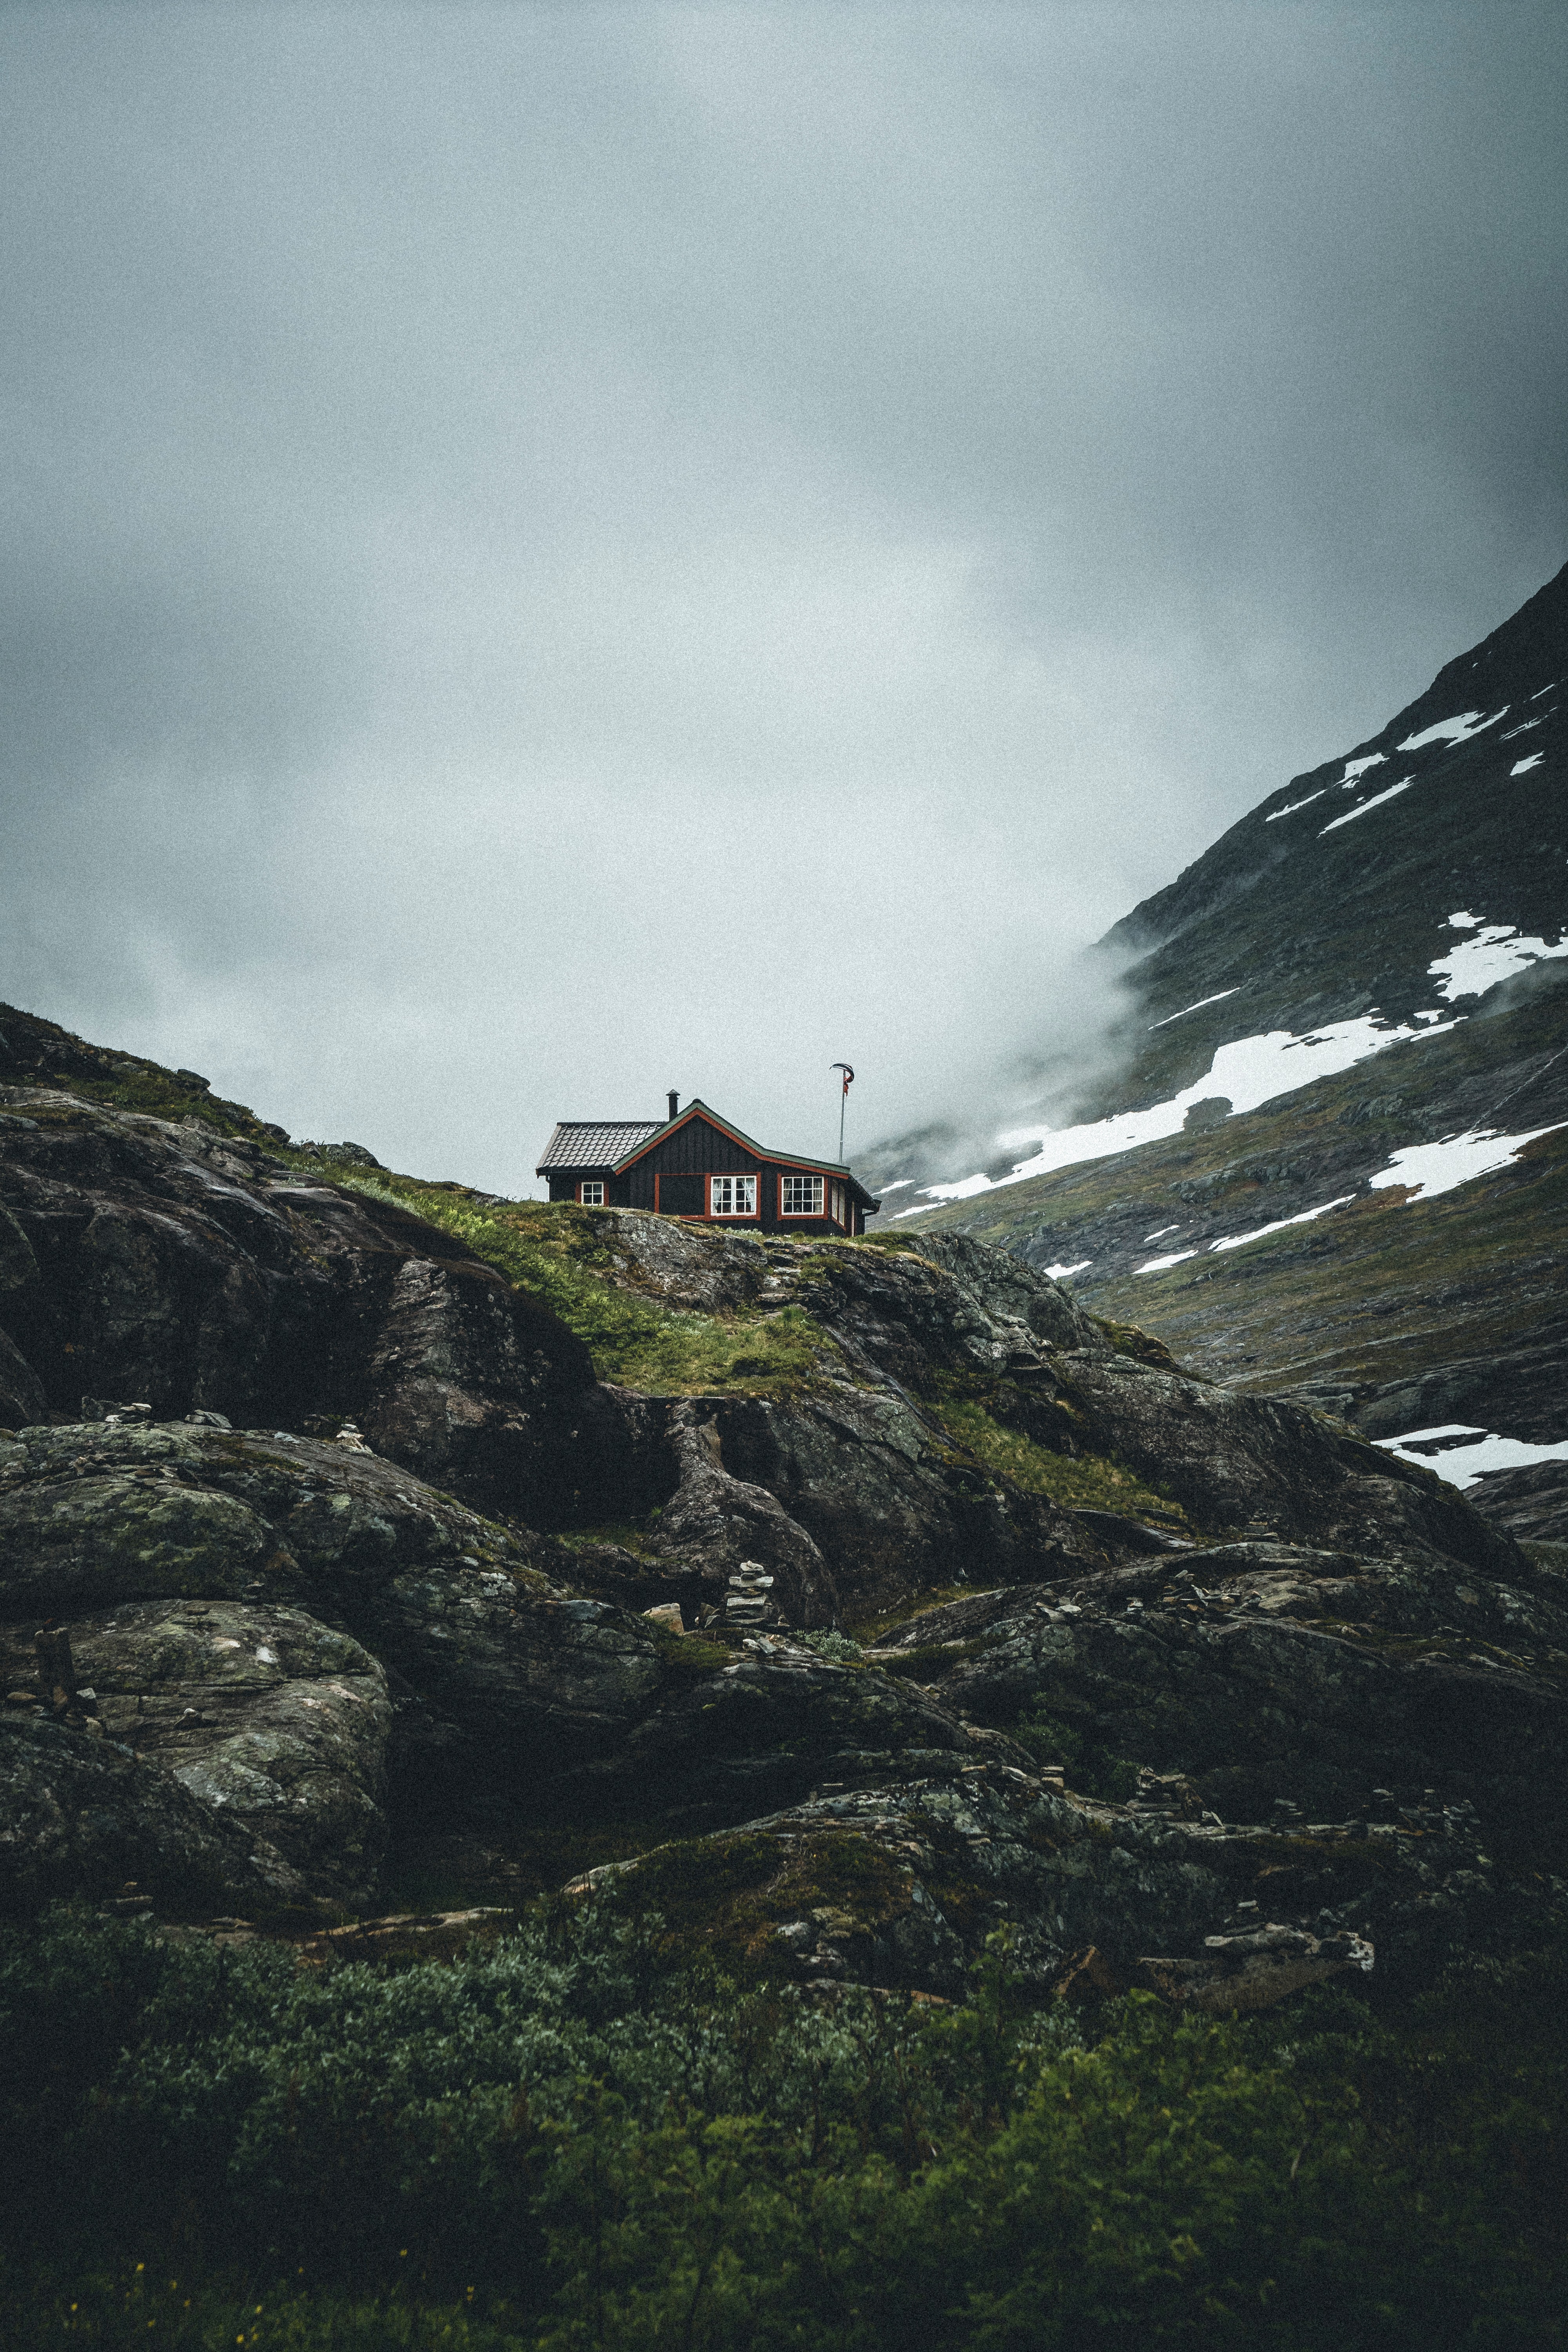 android comfort, nature, rock, mountain, privacy, seclusion, house, coziness